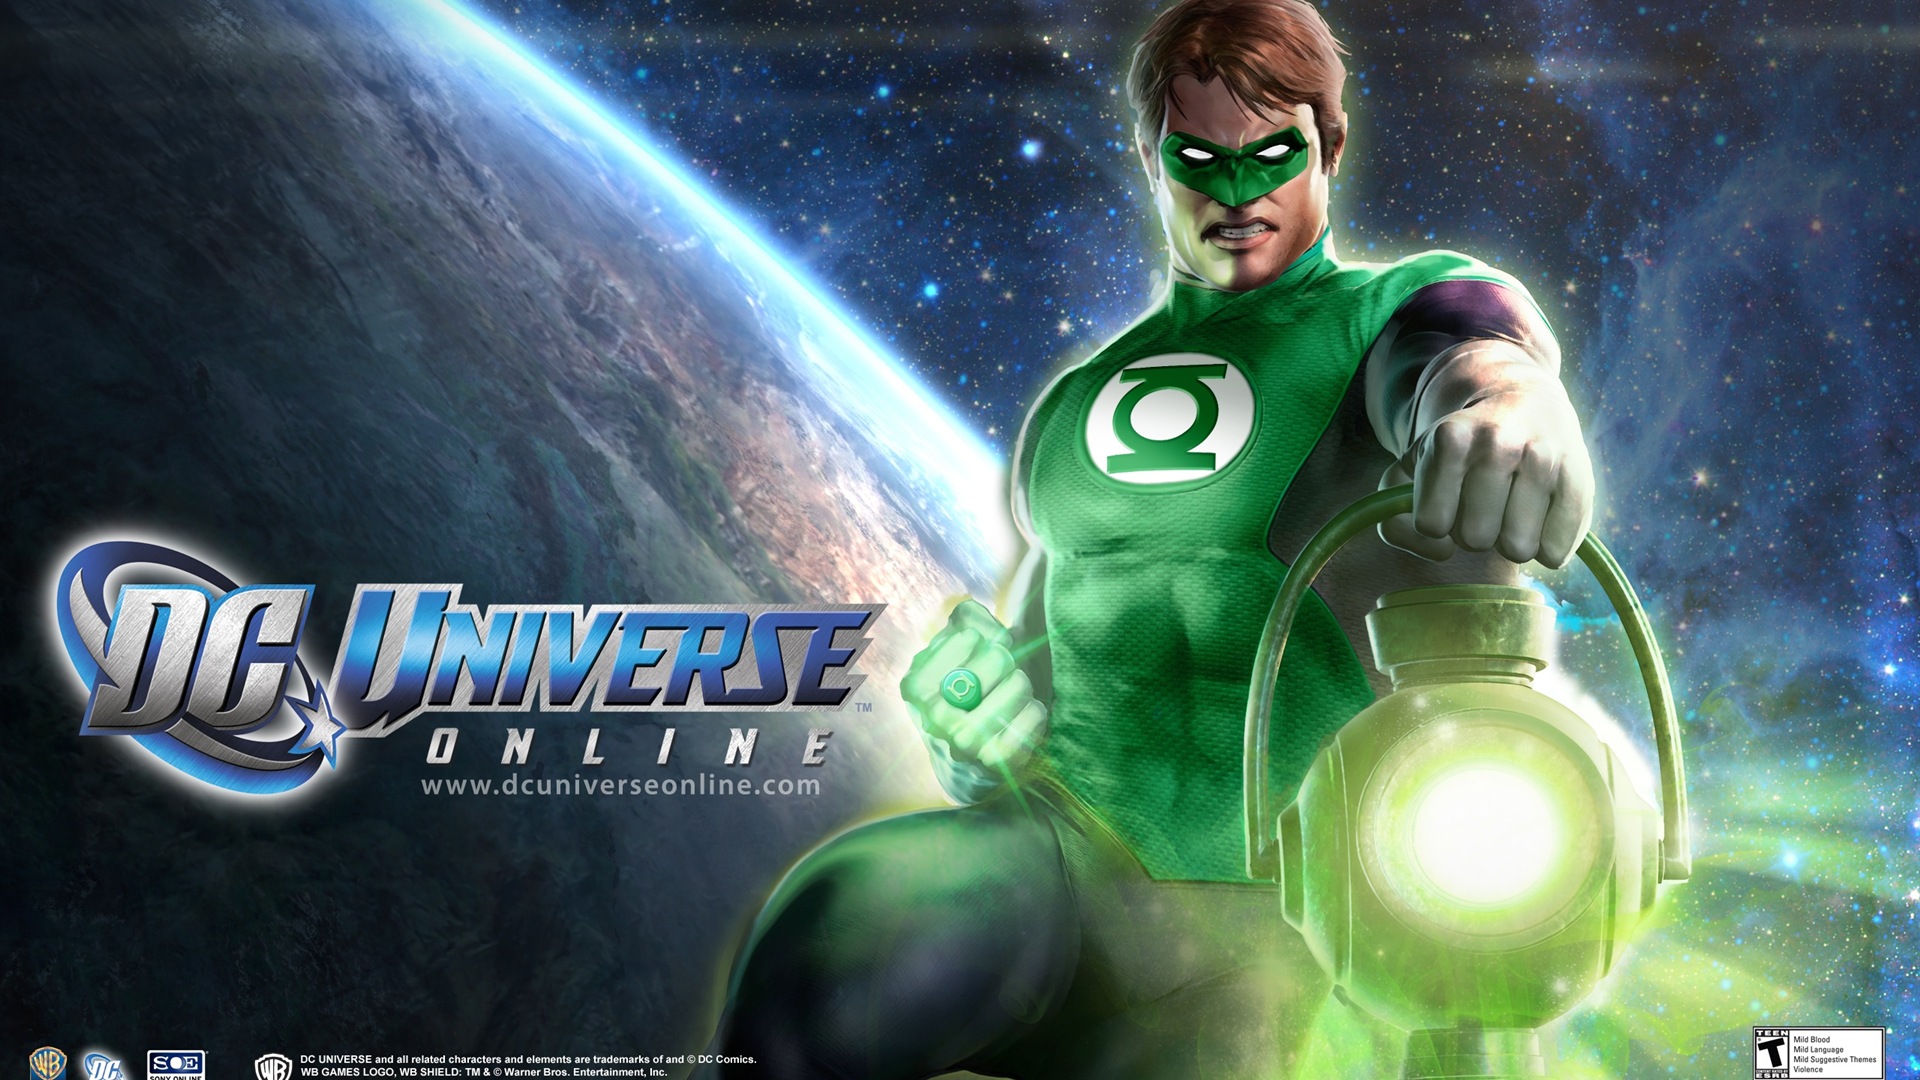 DC Universe Online HD game wallpapers #17 - 1920x1080